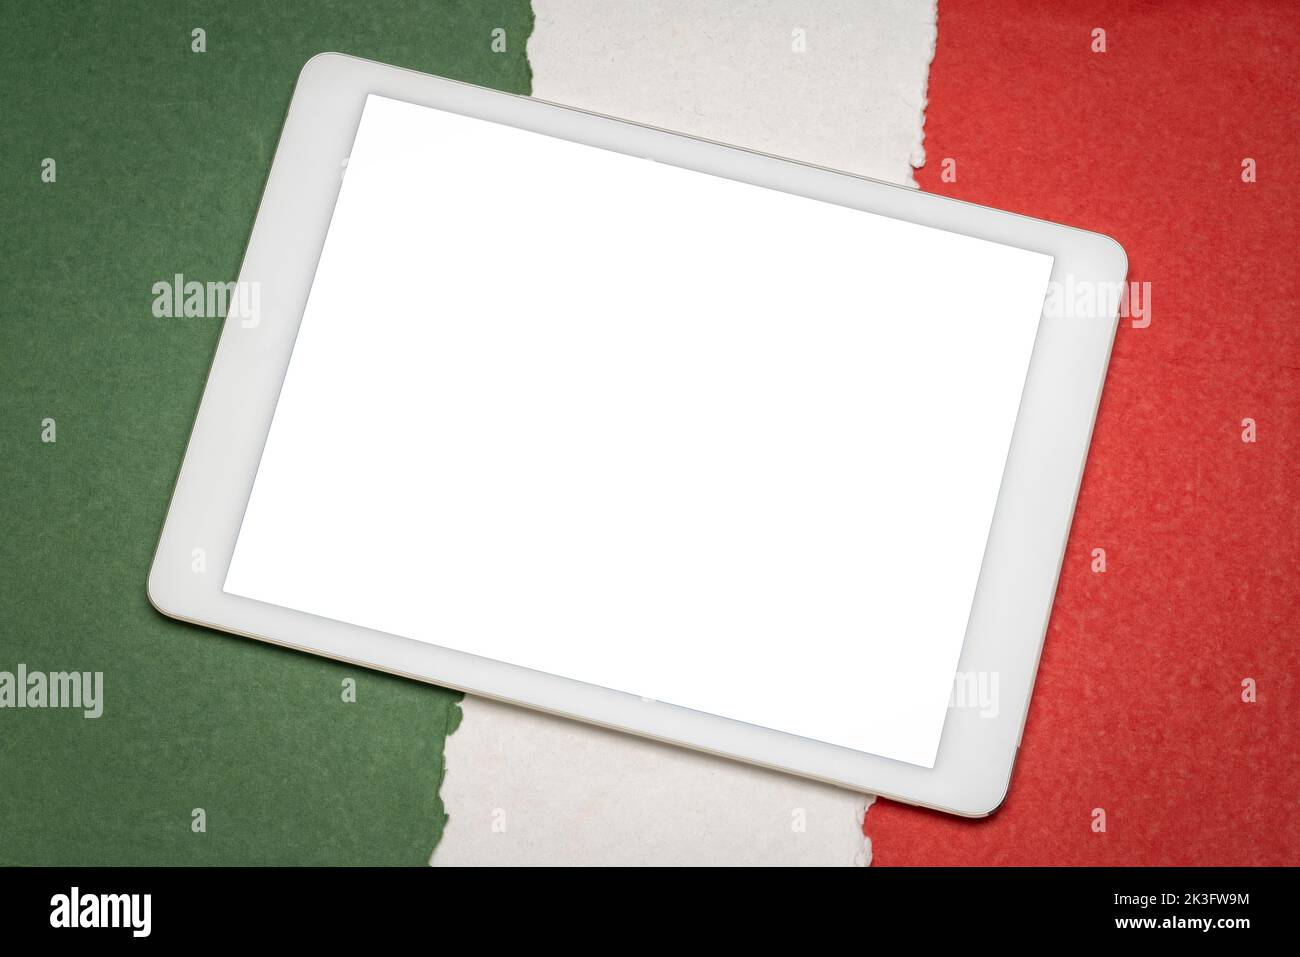 mockup of digital tablet with a blank isolated screen (clipping path included) against paper abstract in colors of Italy national flag, green, white a Stock Photo